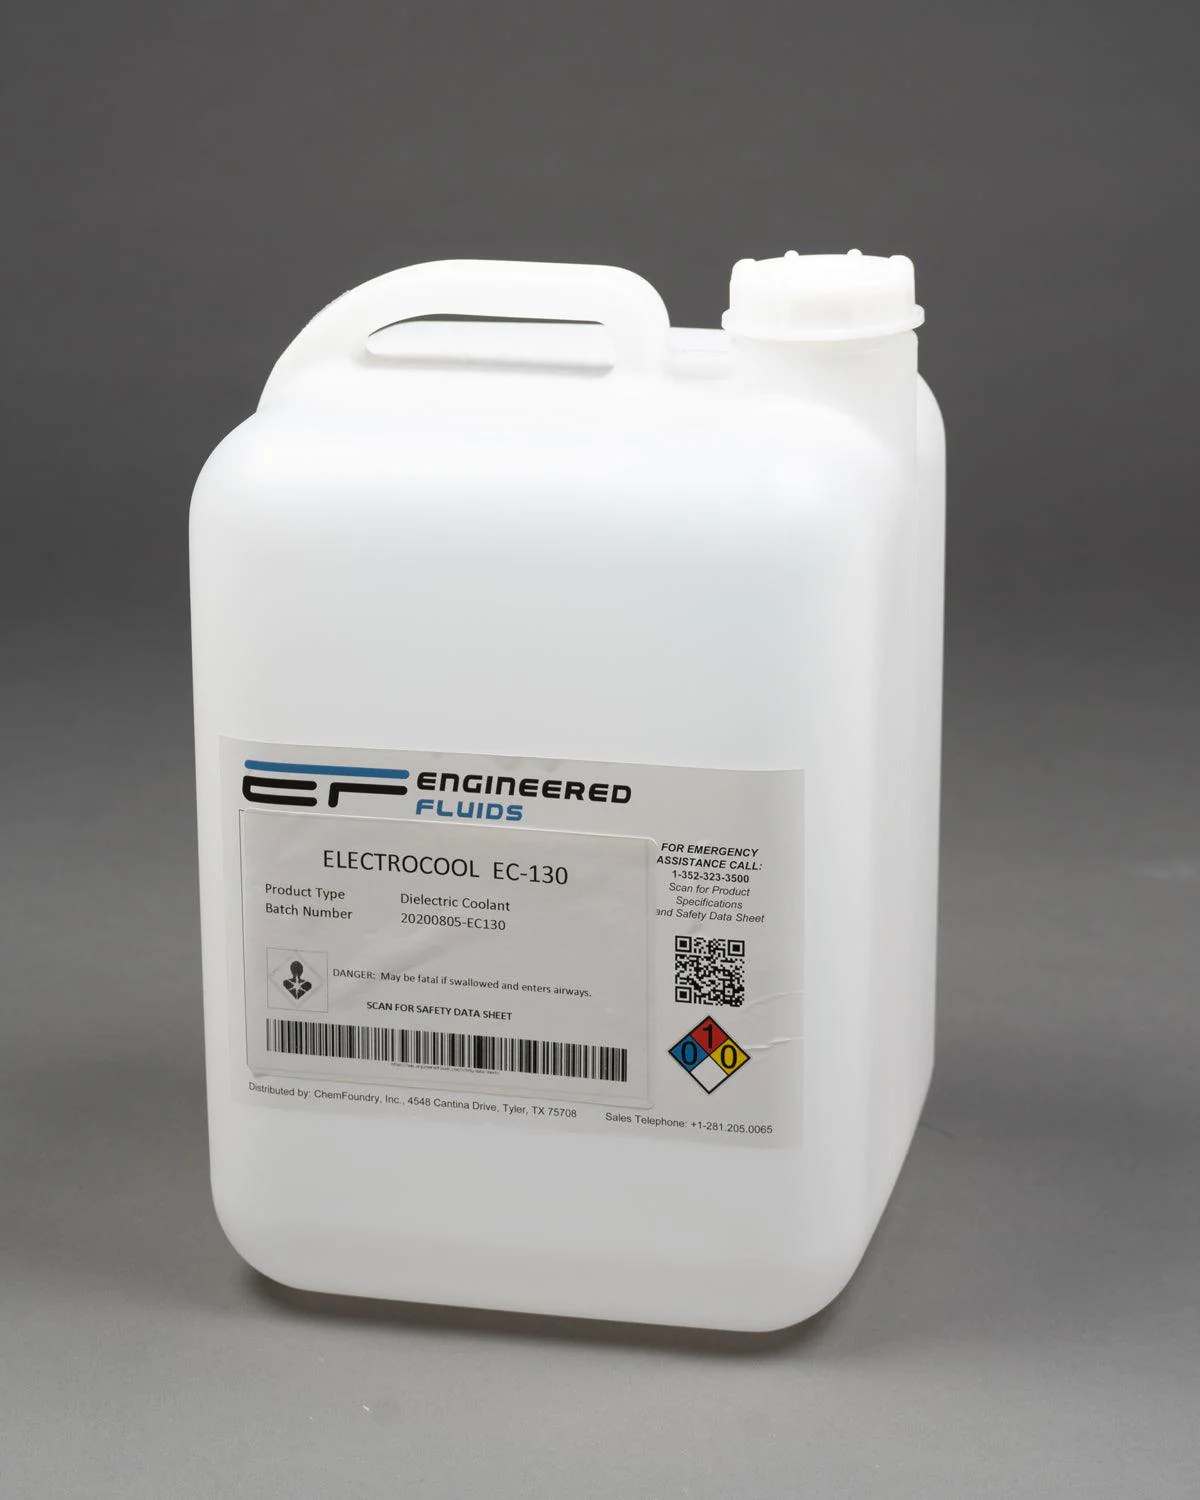 ElectroCool® EC-130 Dielectric Coolant Questions & Answers